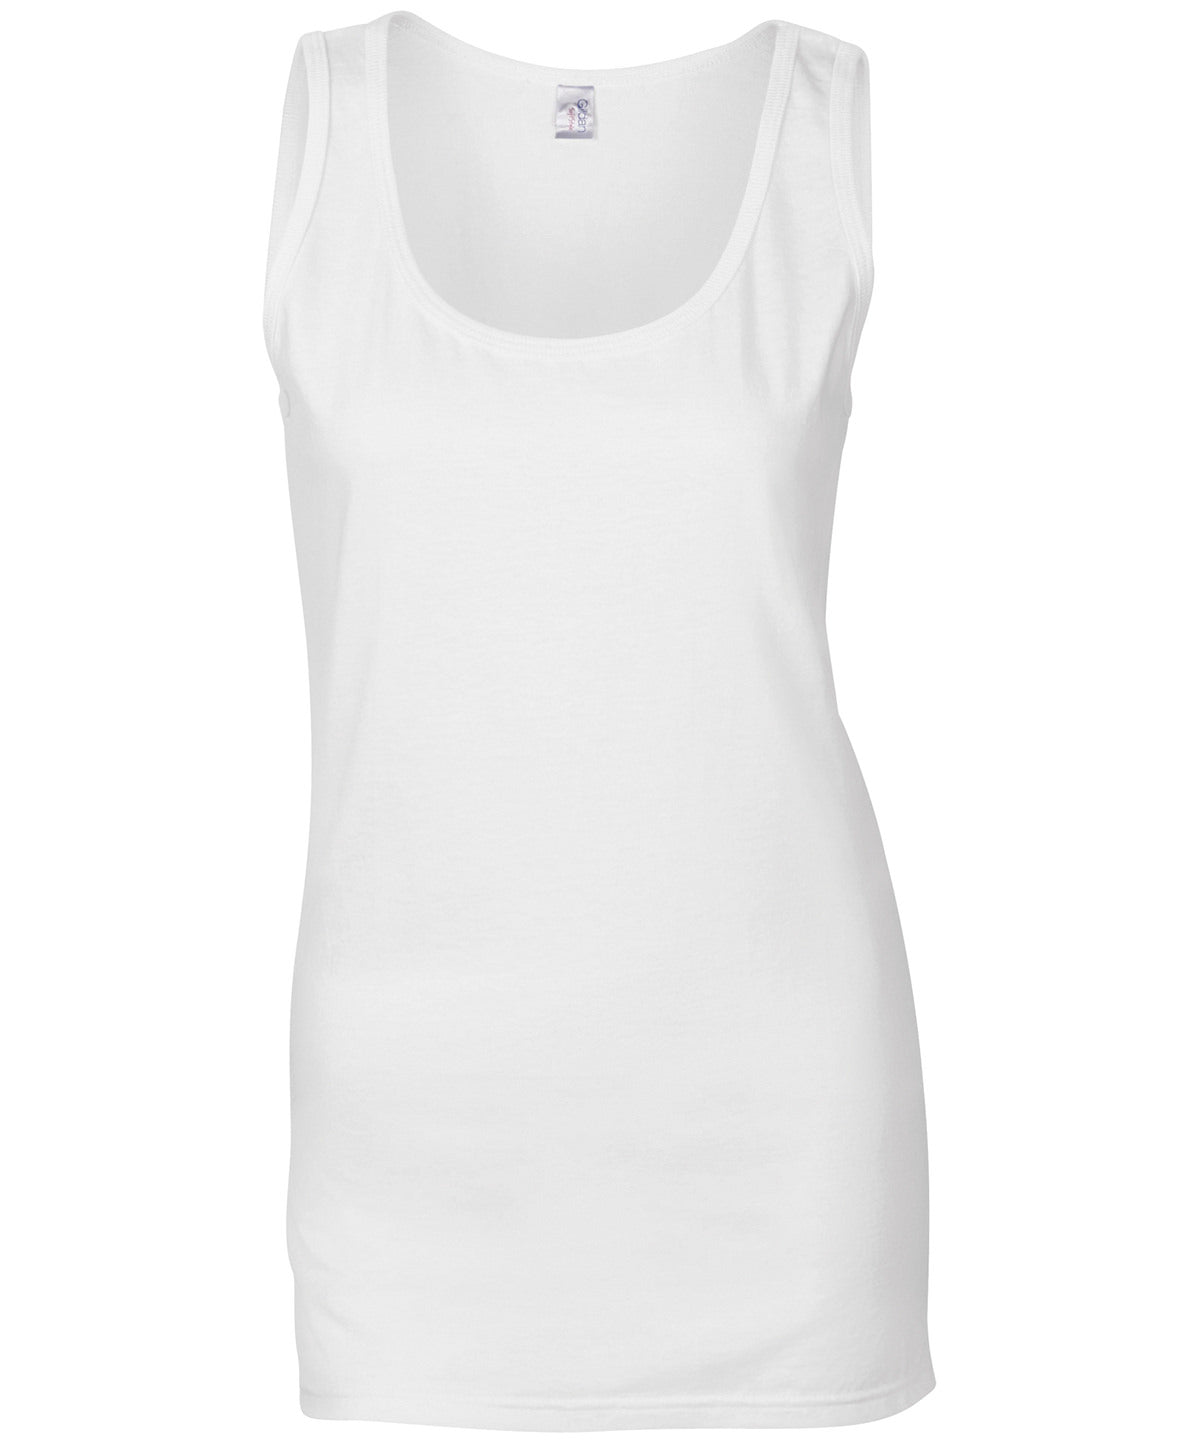 Softstyle women's tank top | White